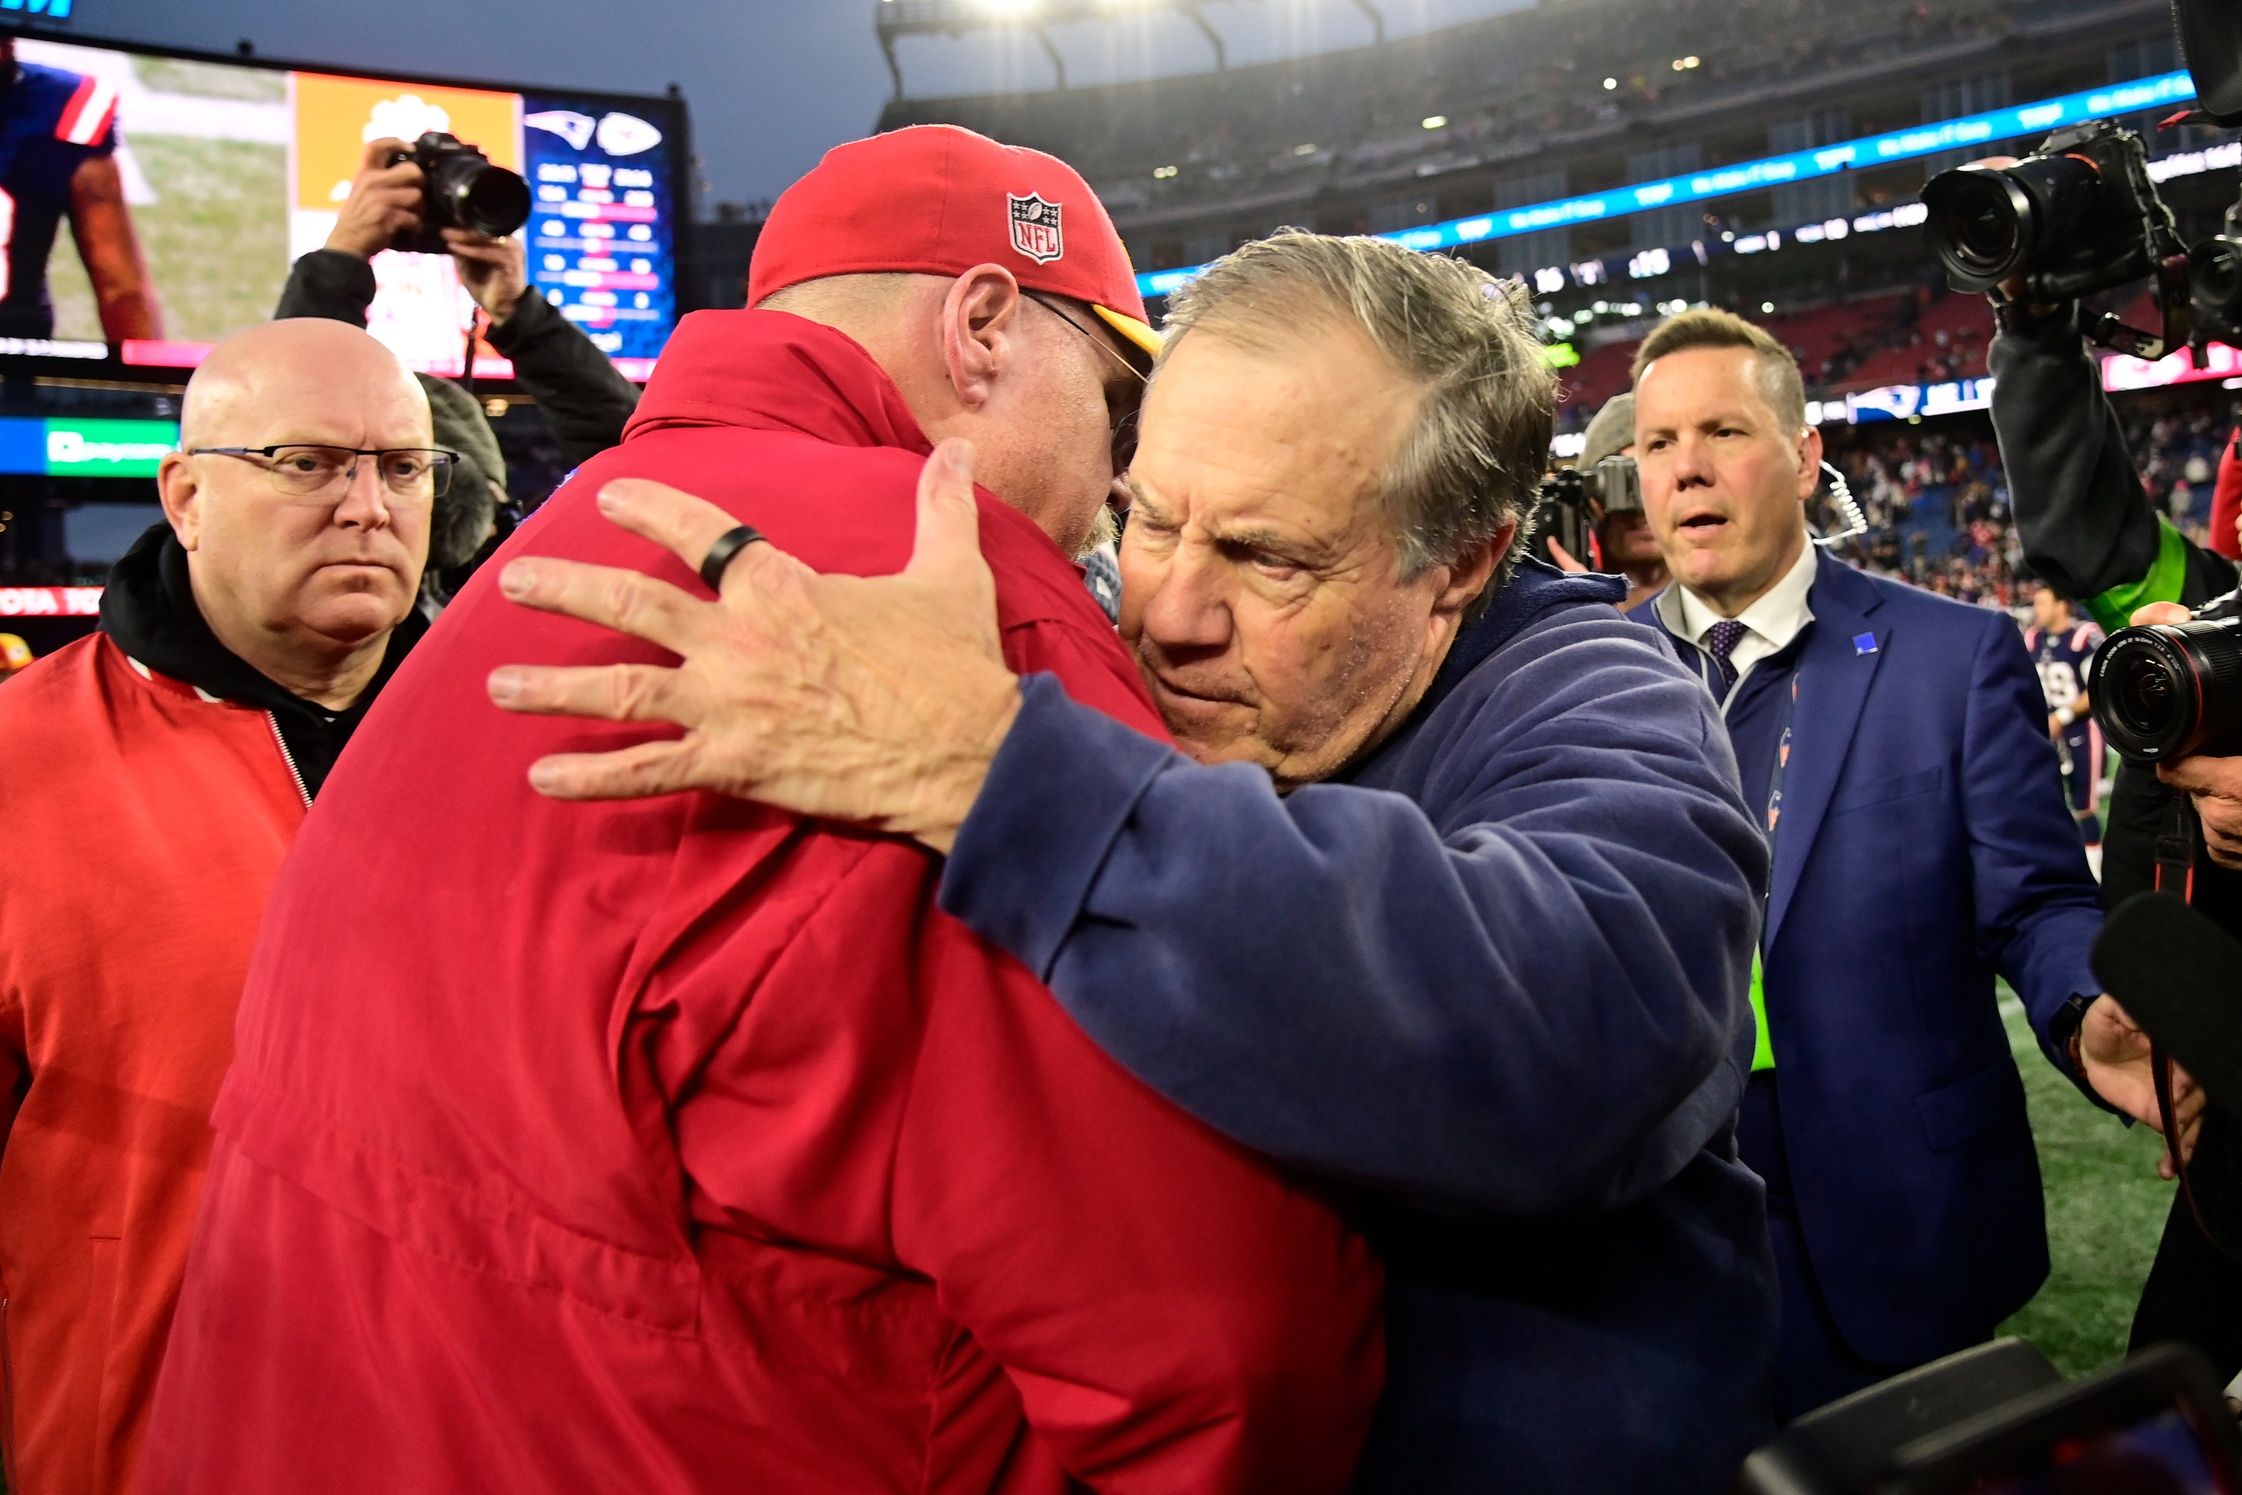 End of an Era: Bill Belichick’s Legendary Tenure with the New England Patriots - 11